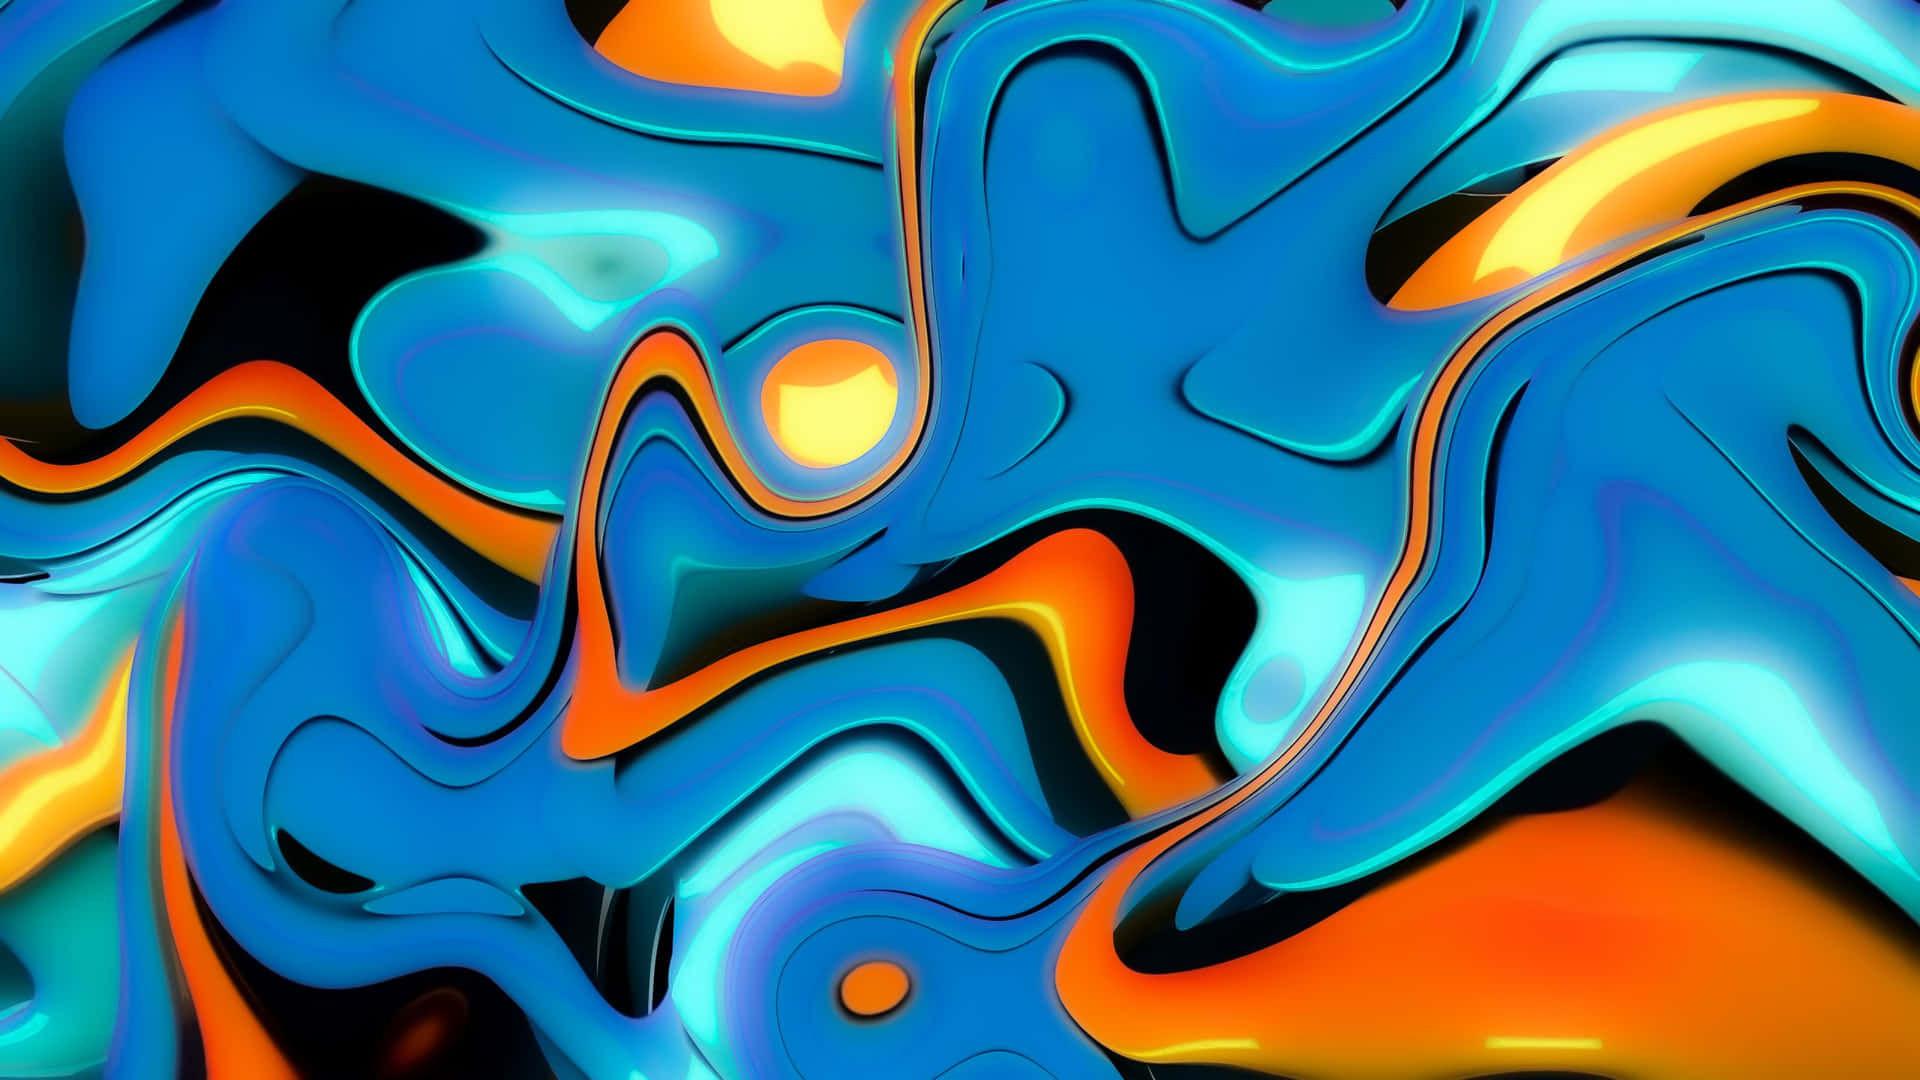 Abstract Blue And Orange Swirl Background